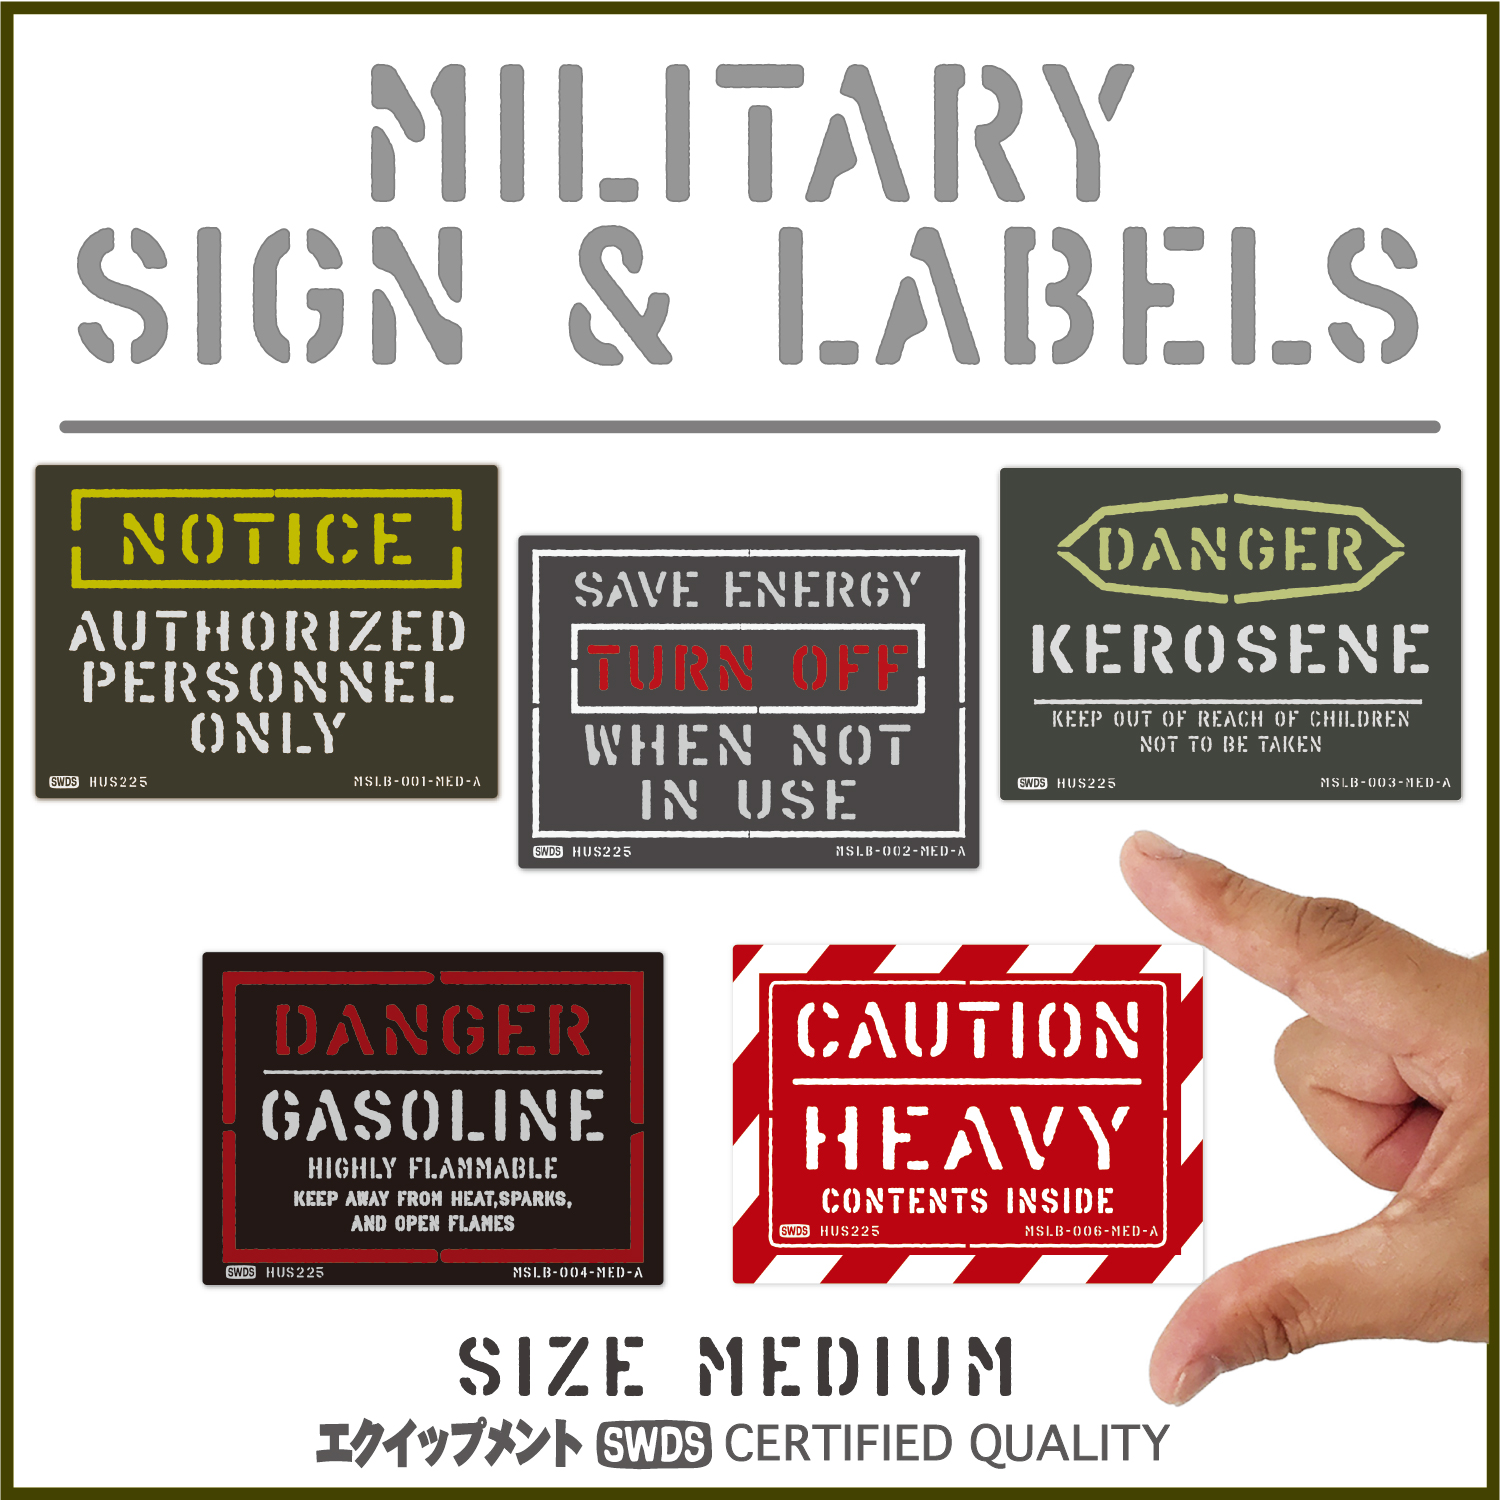 MILITARY SIGN